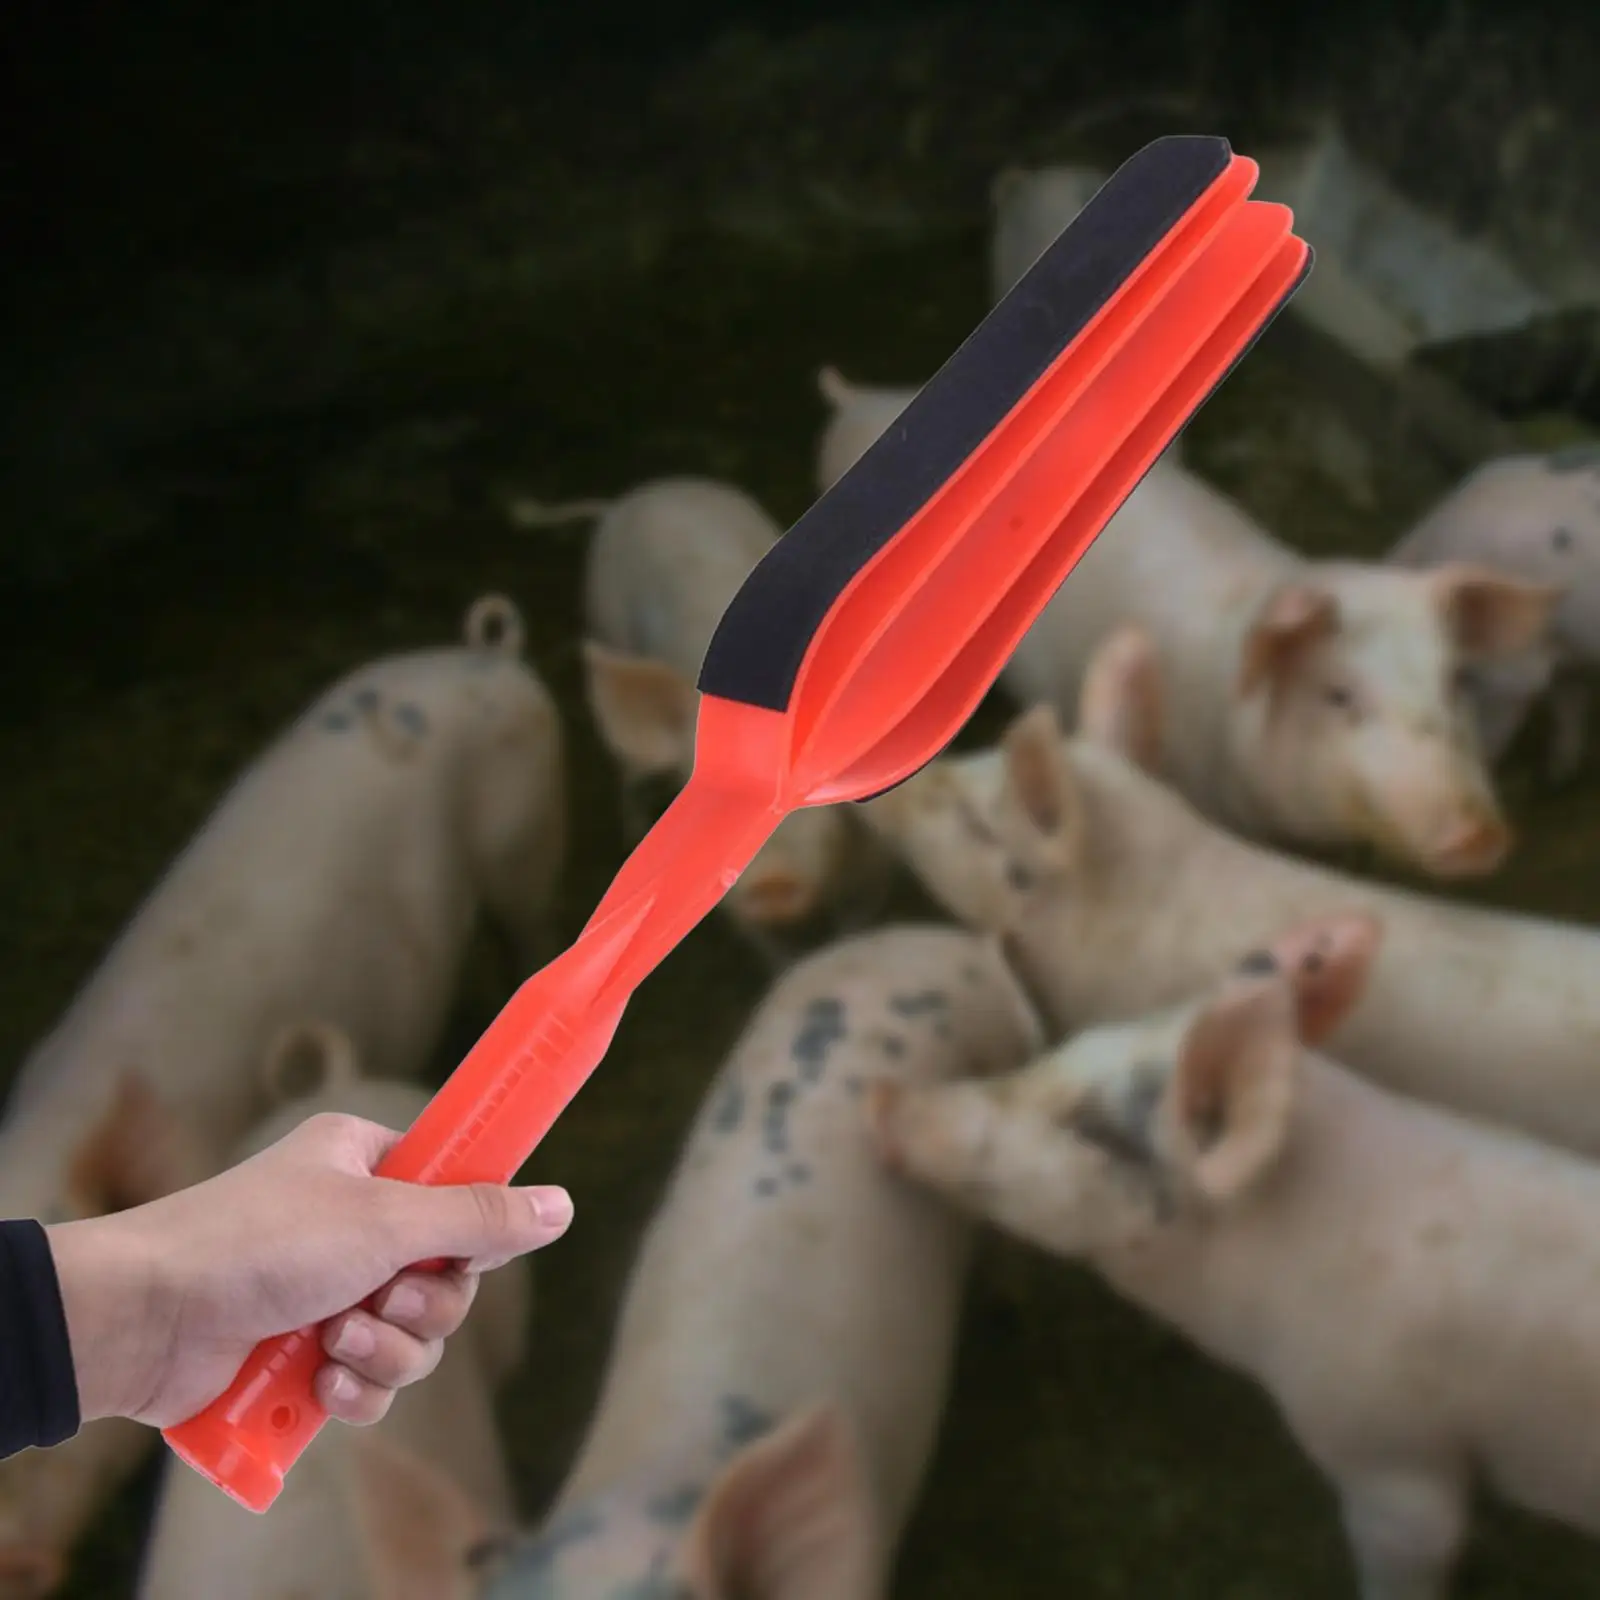 Hand Held Cattle Prod Sheep Ranch Care Handling Supplies Livestock Prod Pigs Prod Wand Cows Prod for Farm Patio Goats Garden